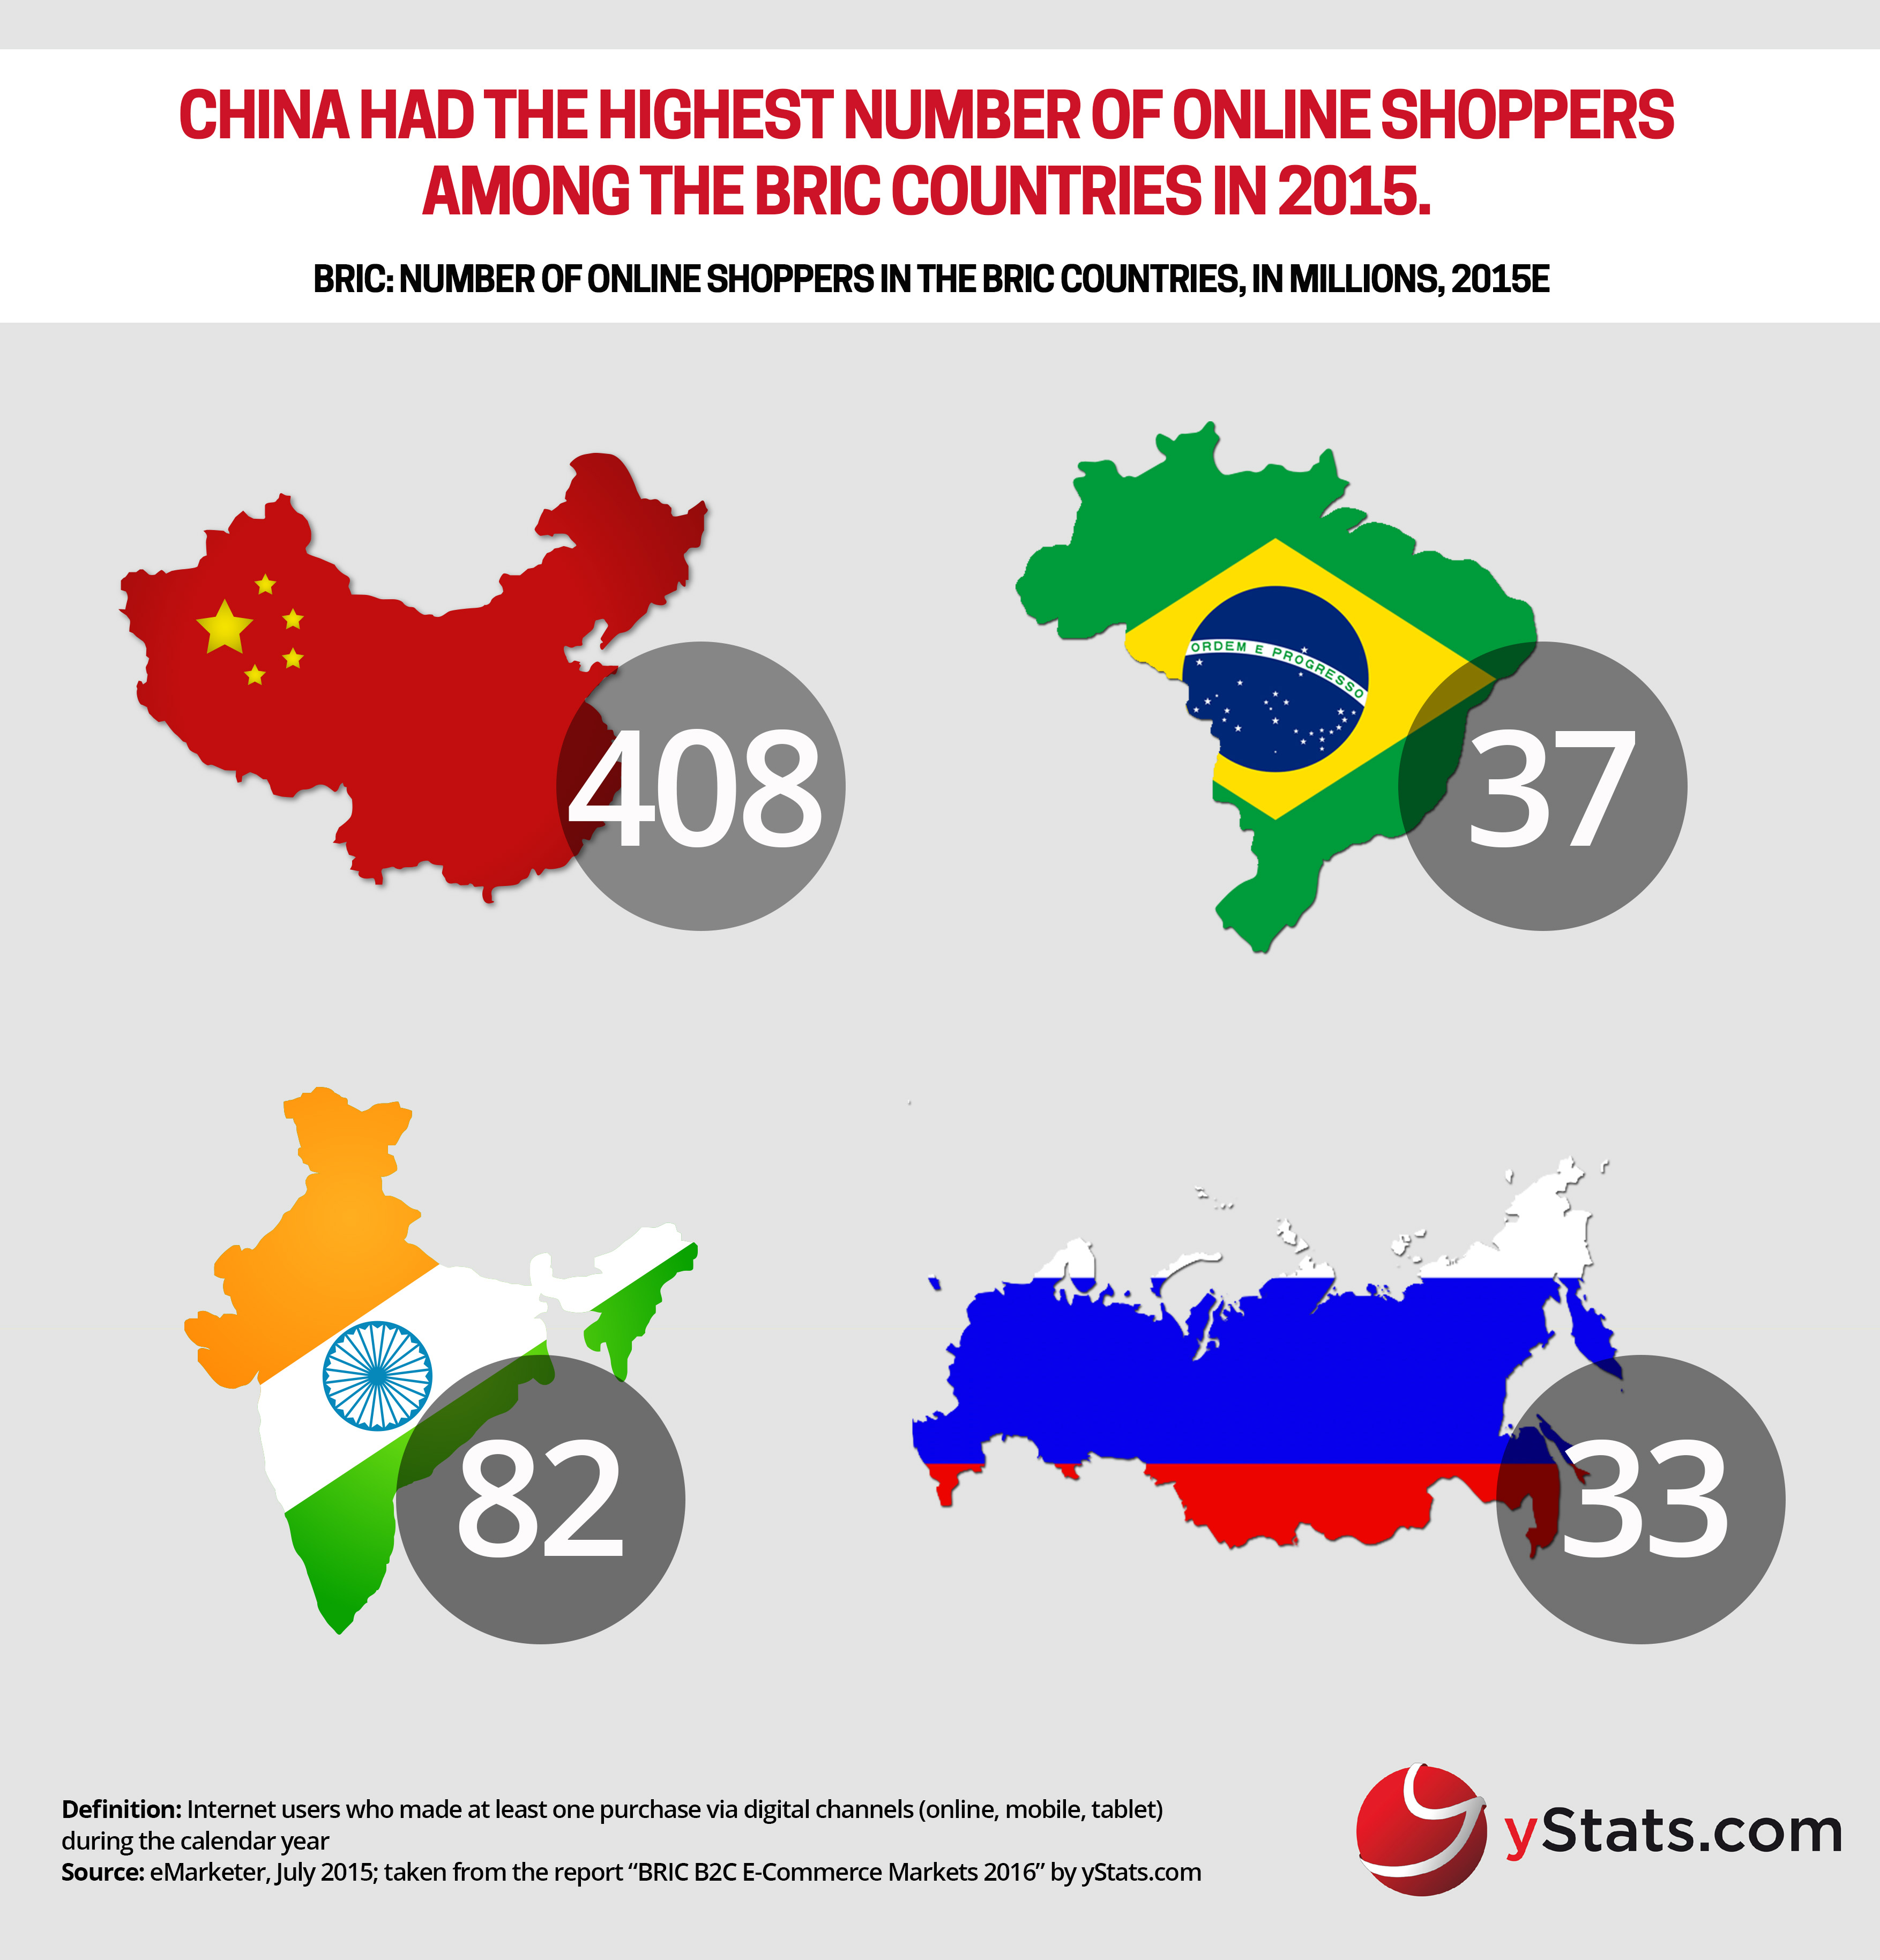 online shoppers in BRIC countries